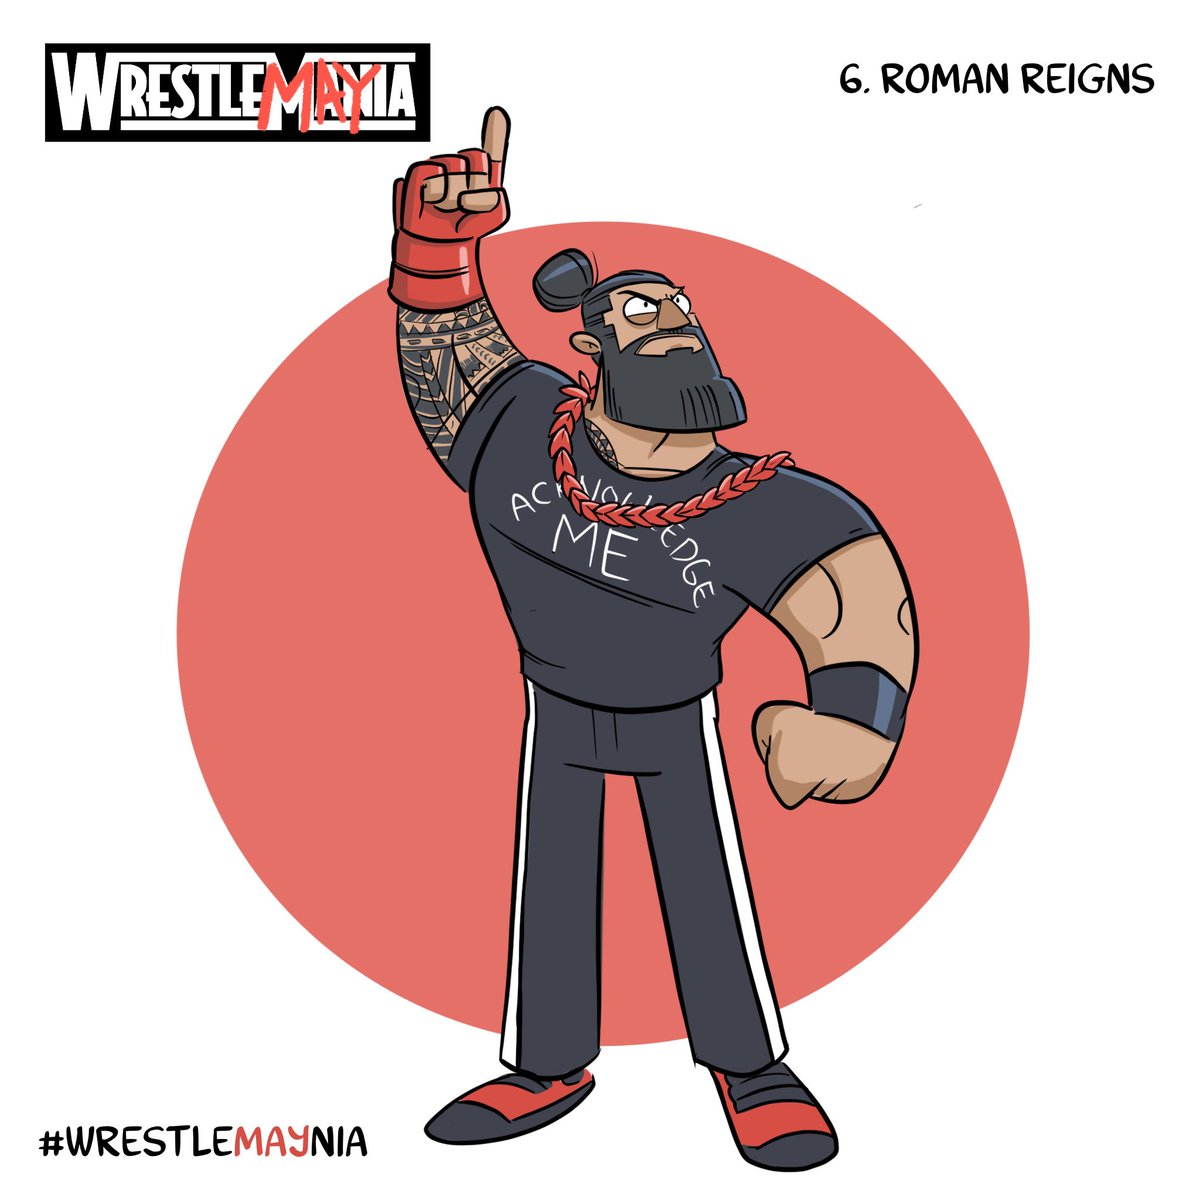 #wrestleMAYnia day 6: step upon the island of relevancy and acknowledge your tribal chief, Roman Reigns!

#romanreigns #bloodline #headofthetable #tribalchief #wee #wwf #iwc #wrestling #prowrestling